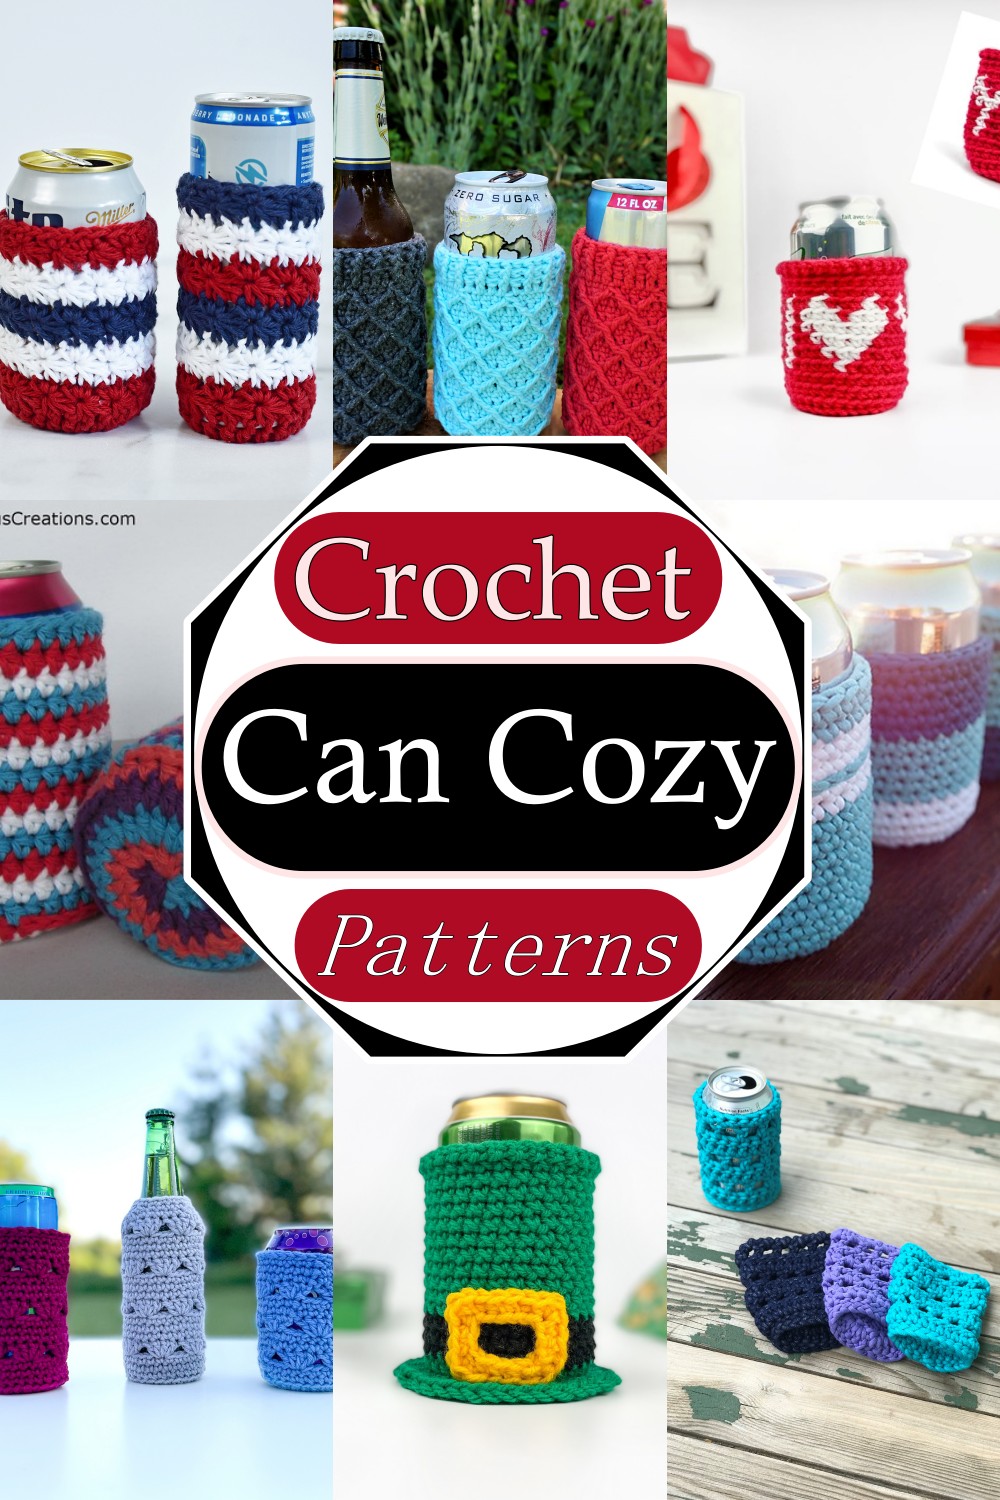 Crochet Can Cozy Patterns